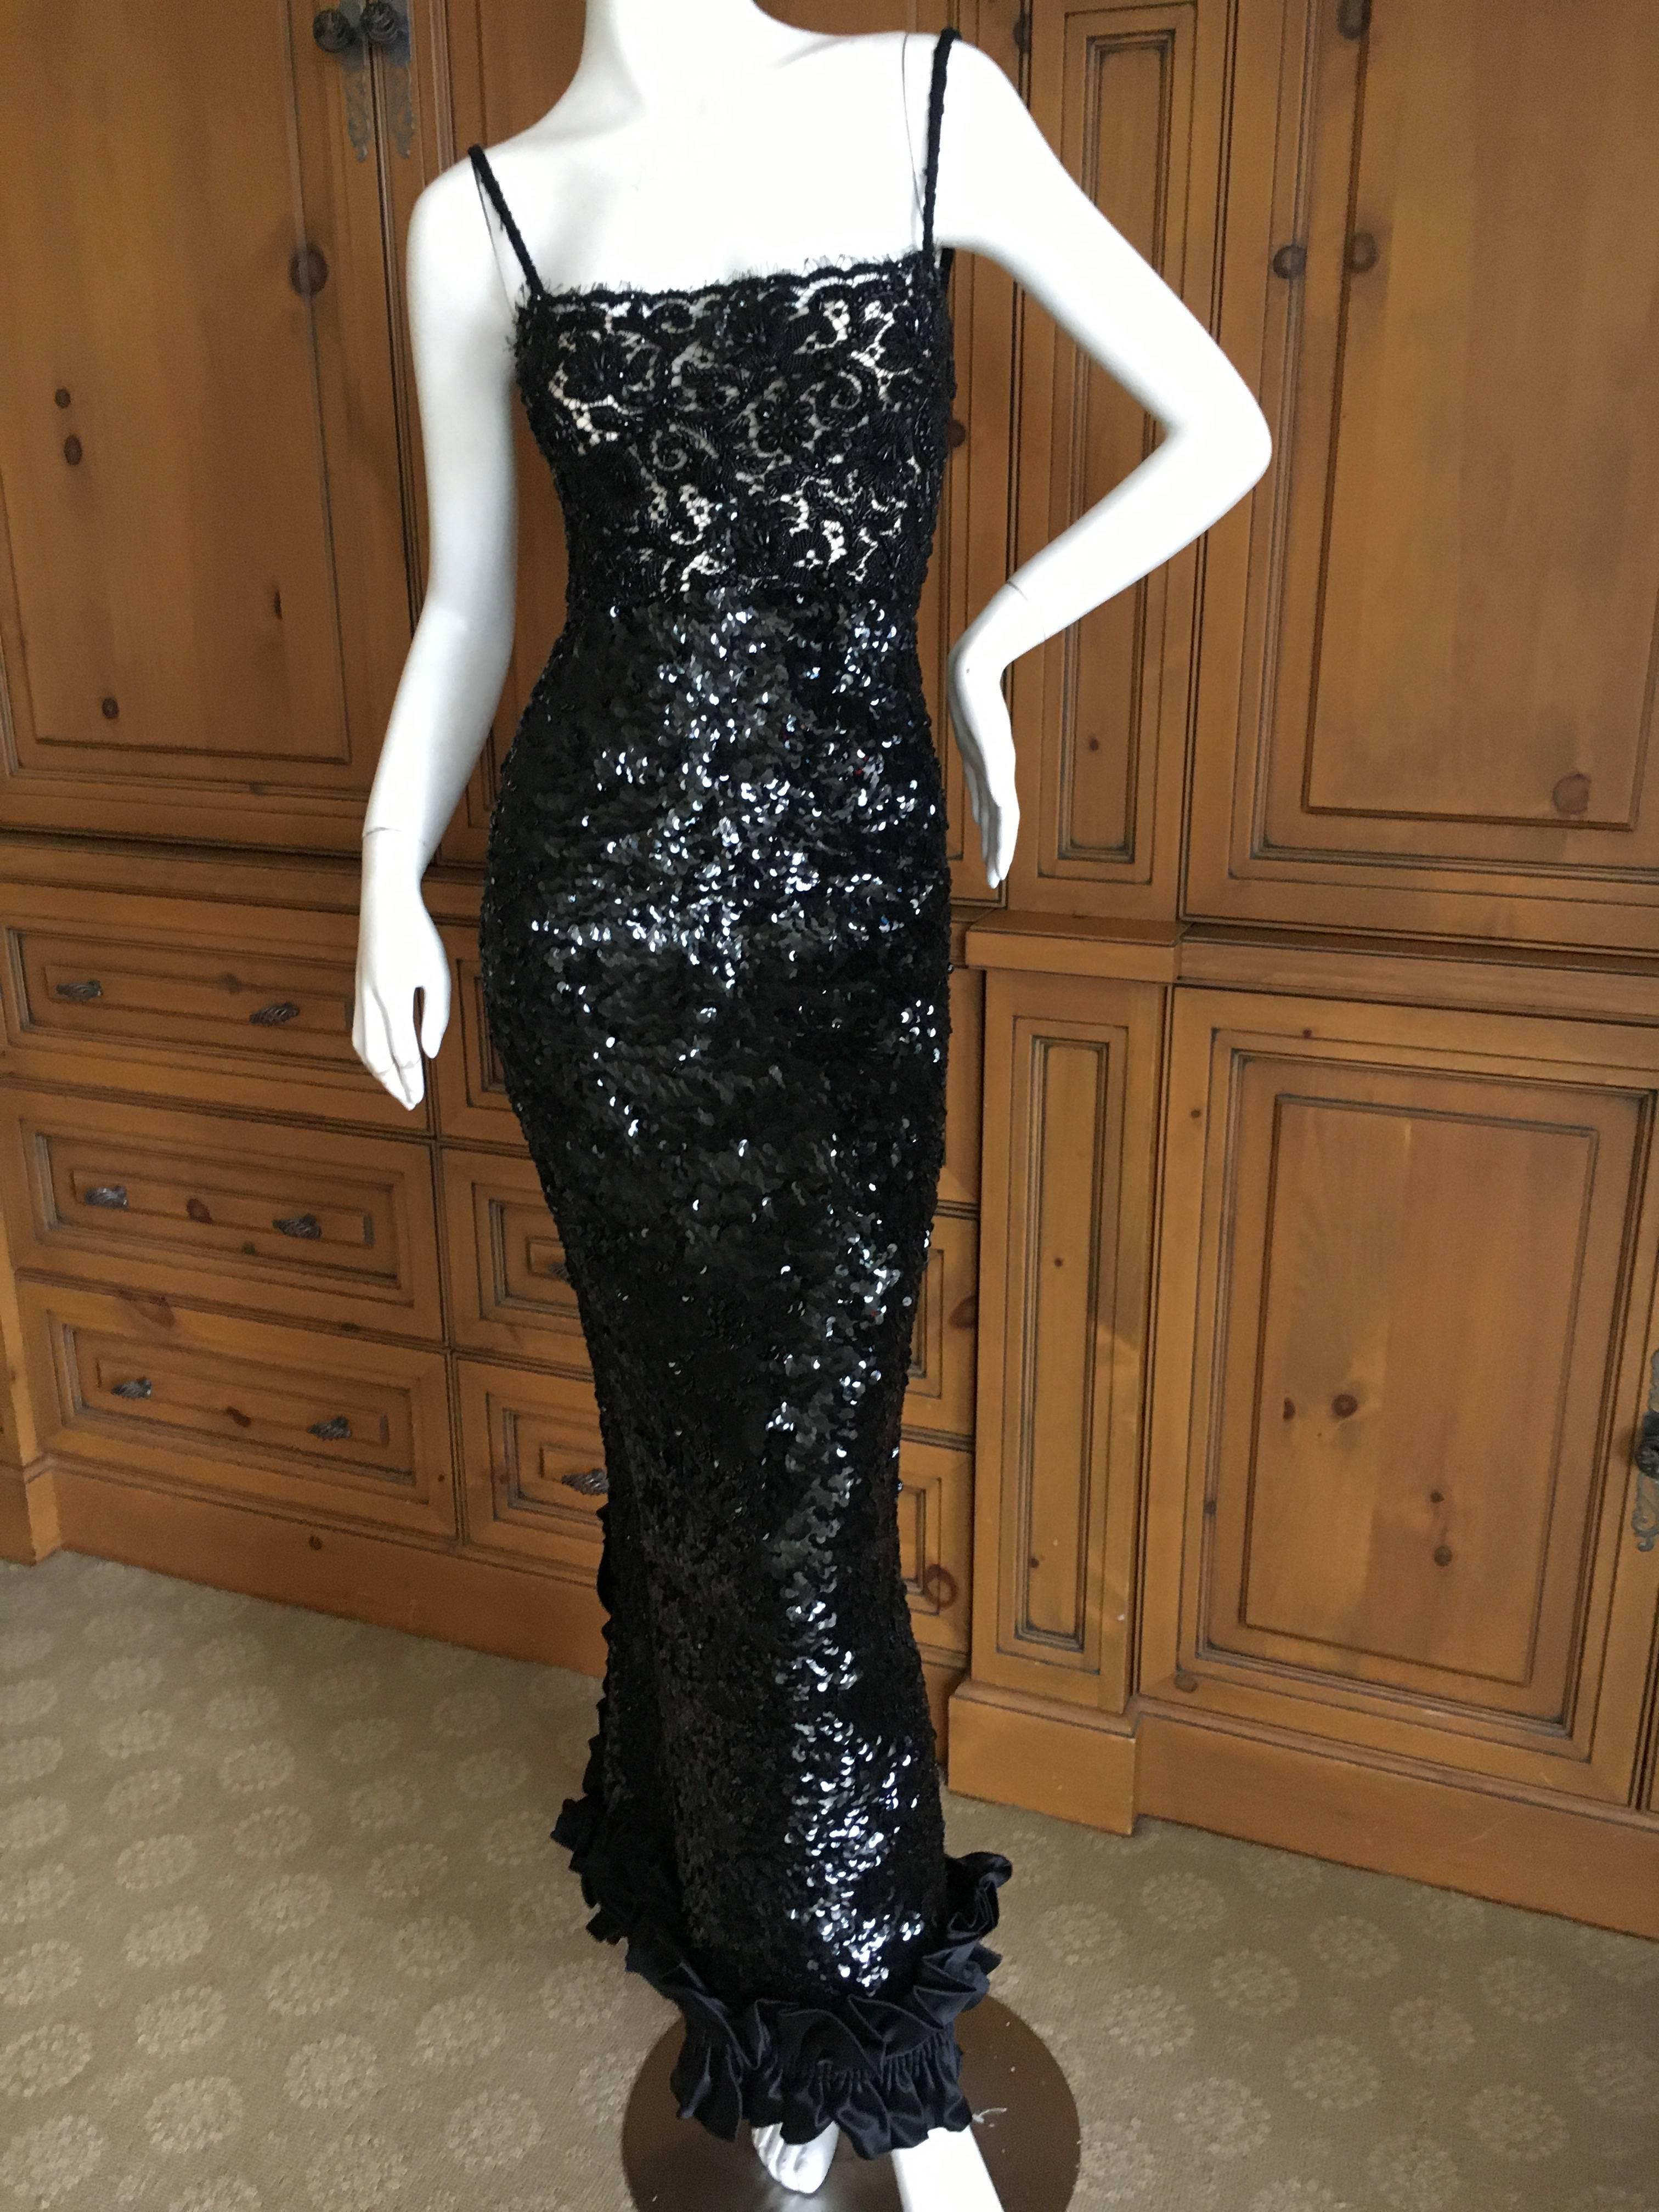 Galanos for Martha Park Avenue Embellished Black Sequin and Lace Evening Dress.
This is simply astonishing, the hand work involved.
The embellished , beaded lace is sheer, and extends all the way down both sides. 
The embellished beaded lace on the